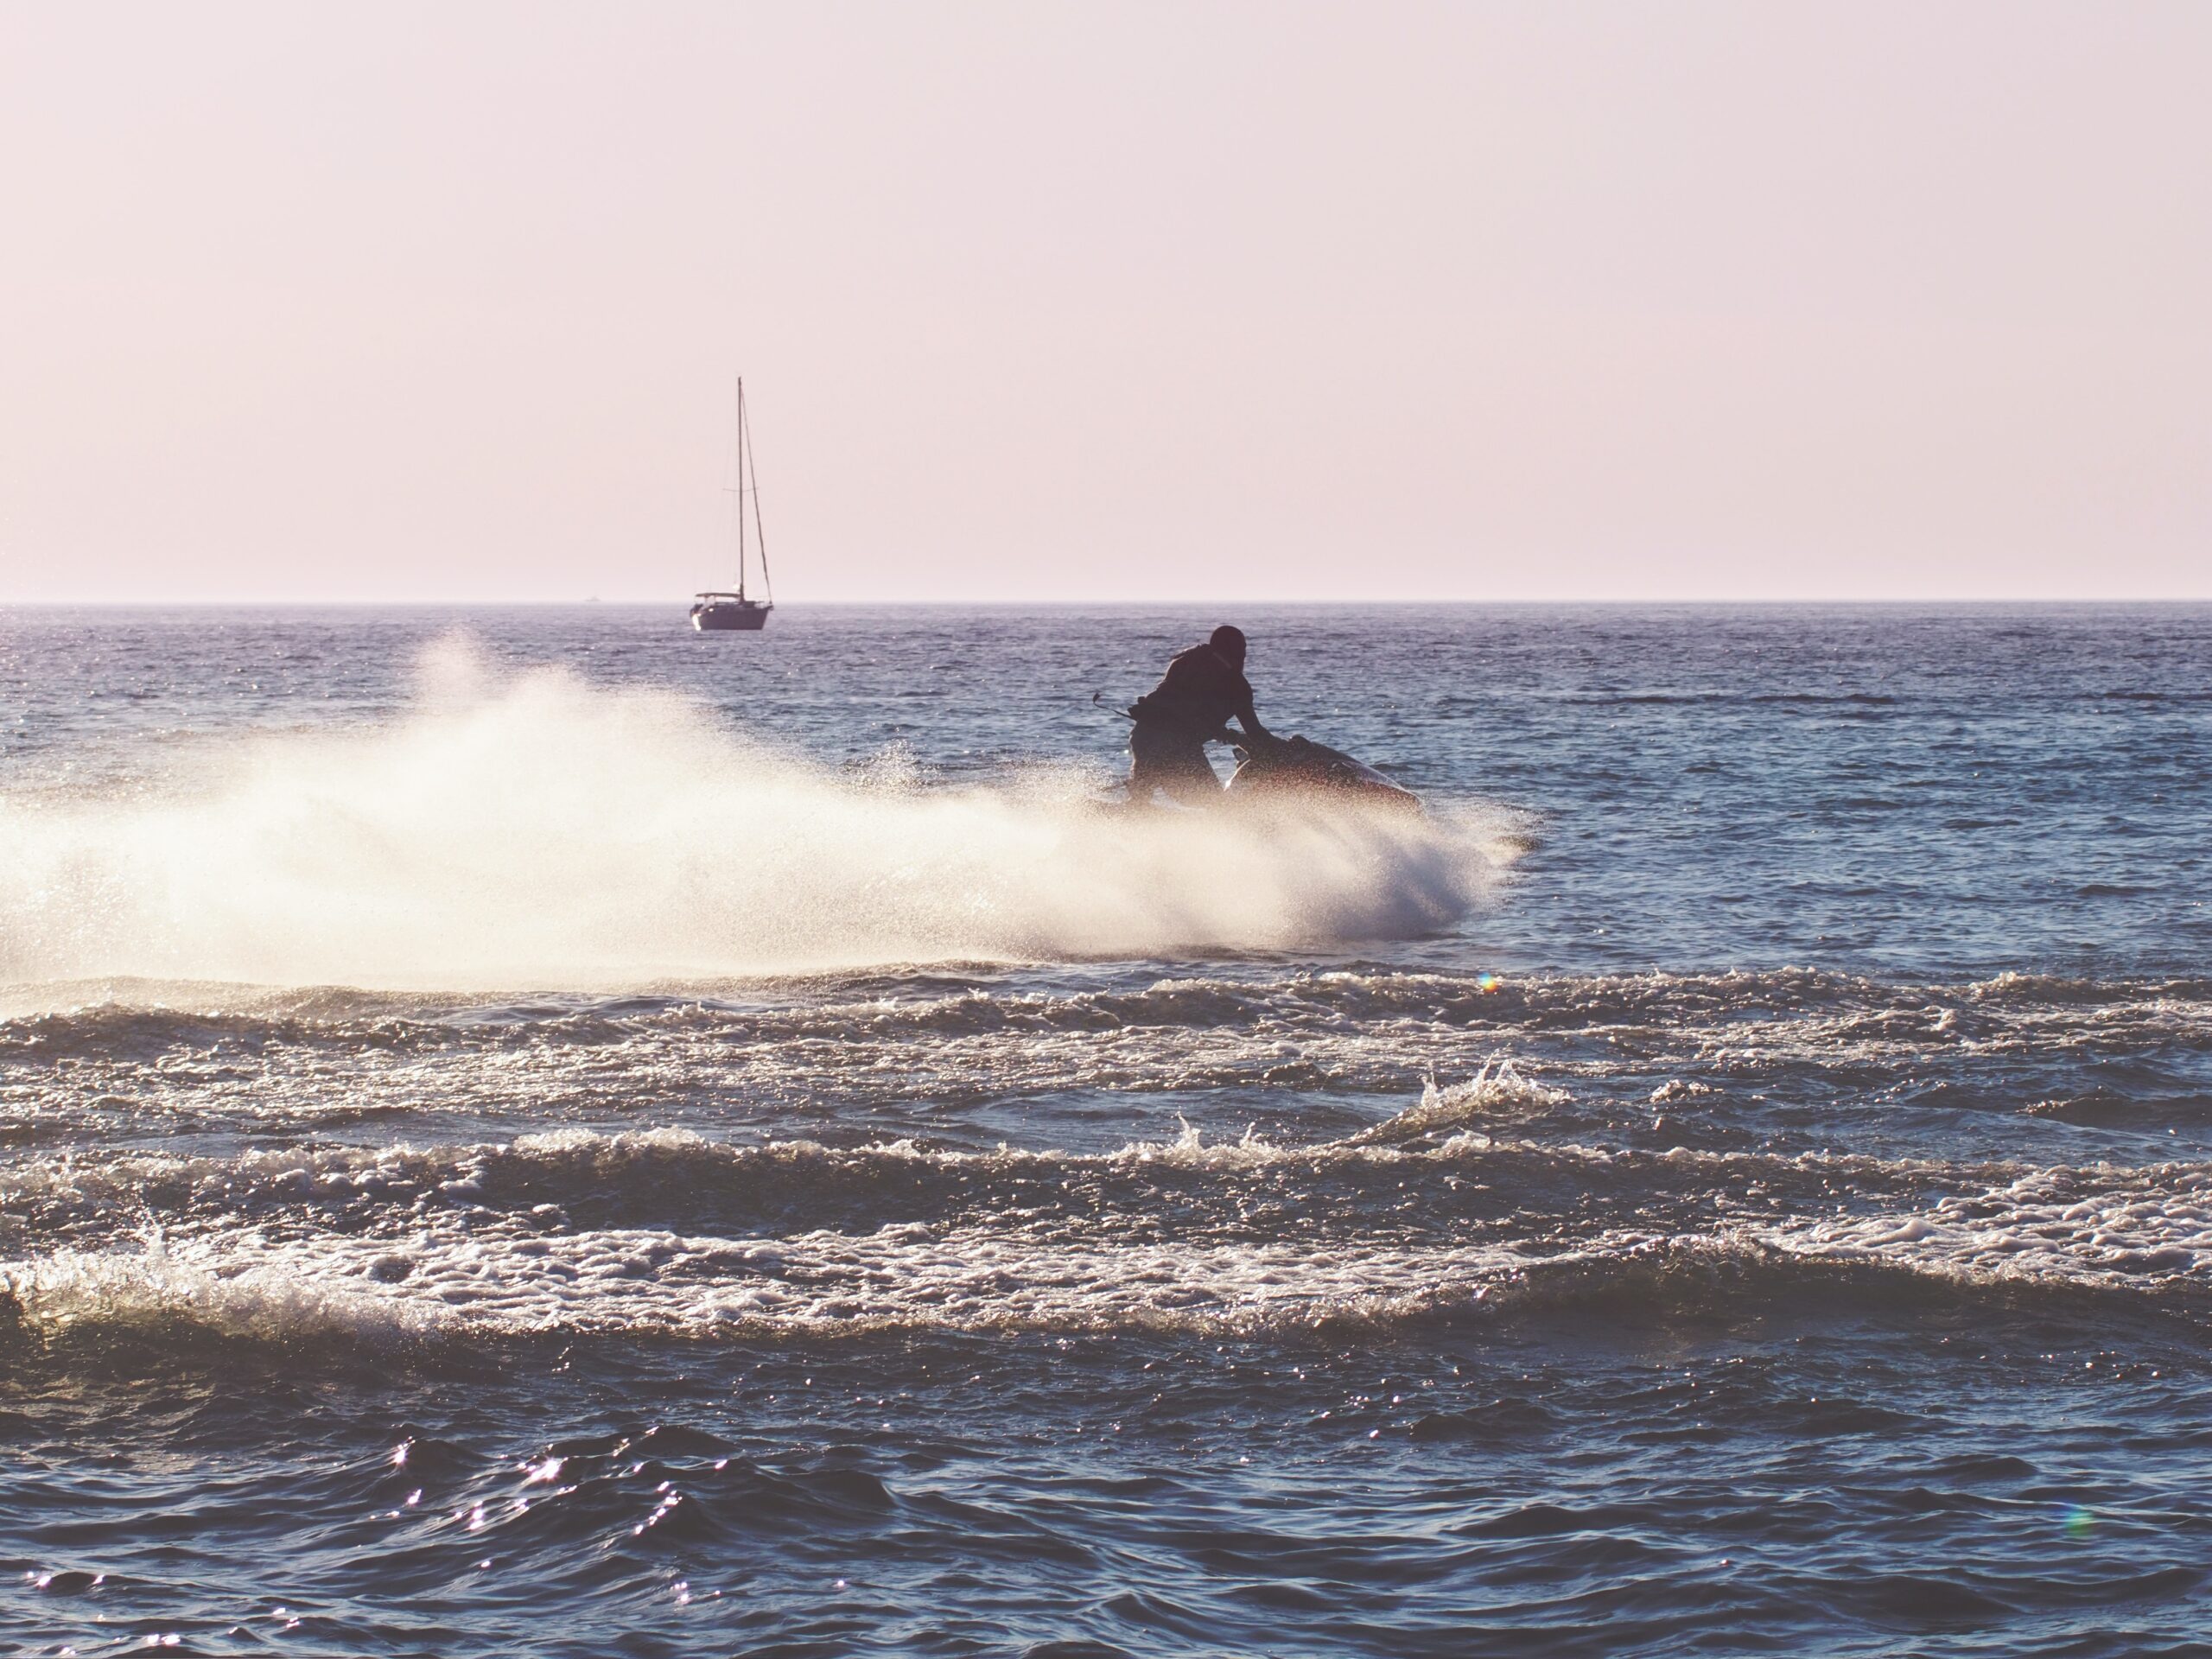 Person enjoying summertime on Lake Michigan driving a Sea-Doo with Sailboat in the background